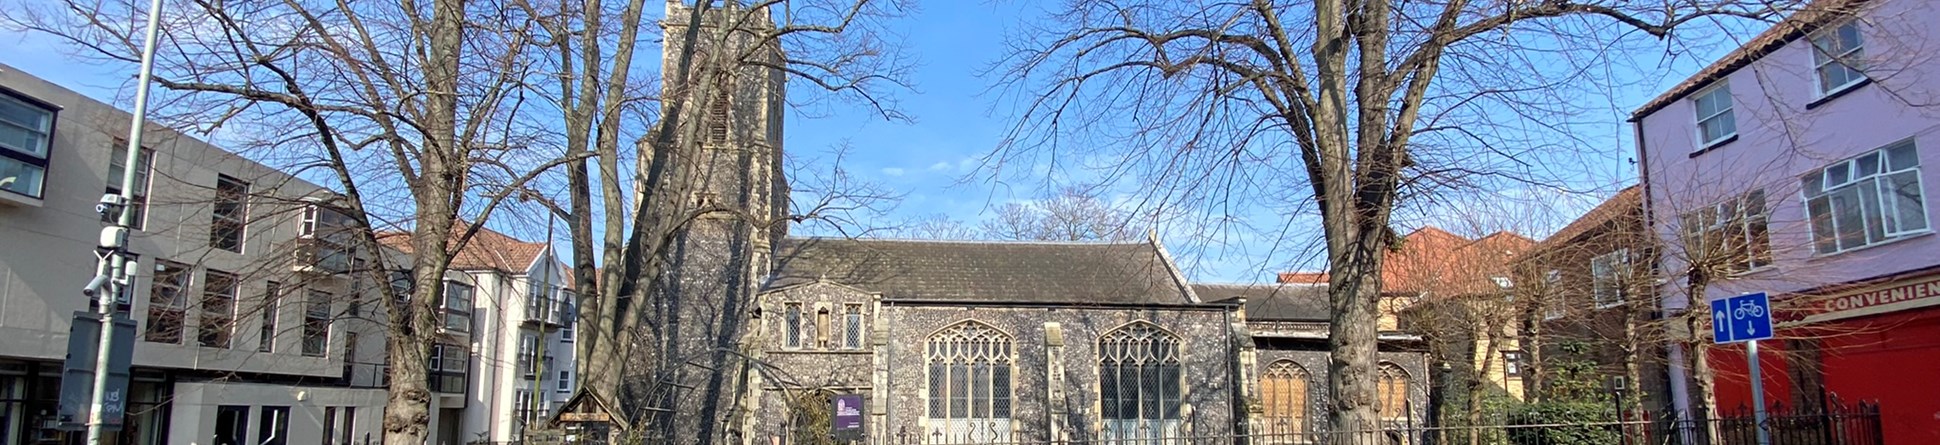 A view from across the street showing the south side of St Margaret de Westwick Church bathed in sunlight. The building is built of grey flint with brick dressings and has plain glass windows. The tower can be seen on the left hand side. Through the wrought iron railings of the churchyard, trees, grass and rows of daffodils can be seen.